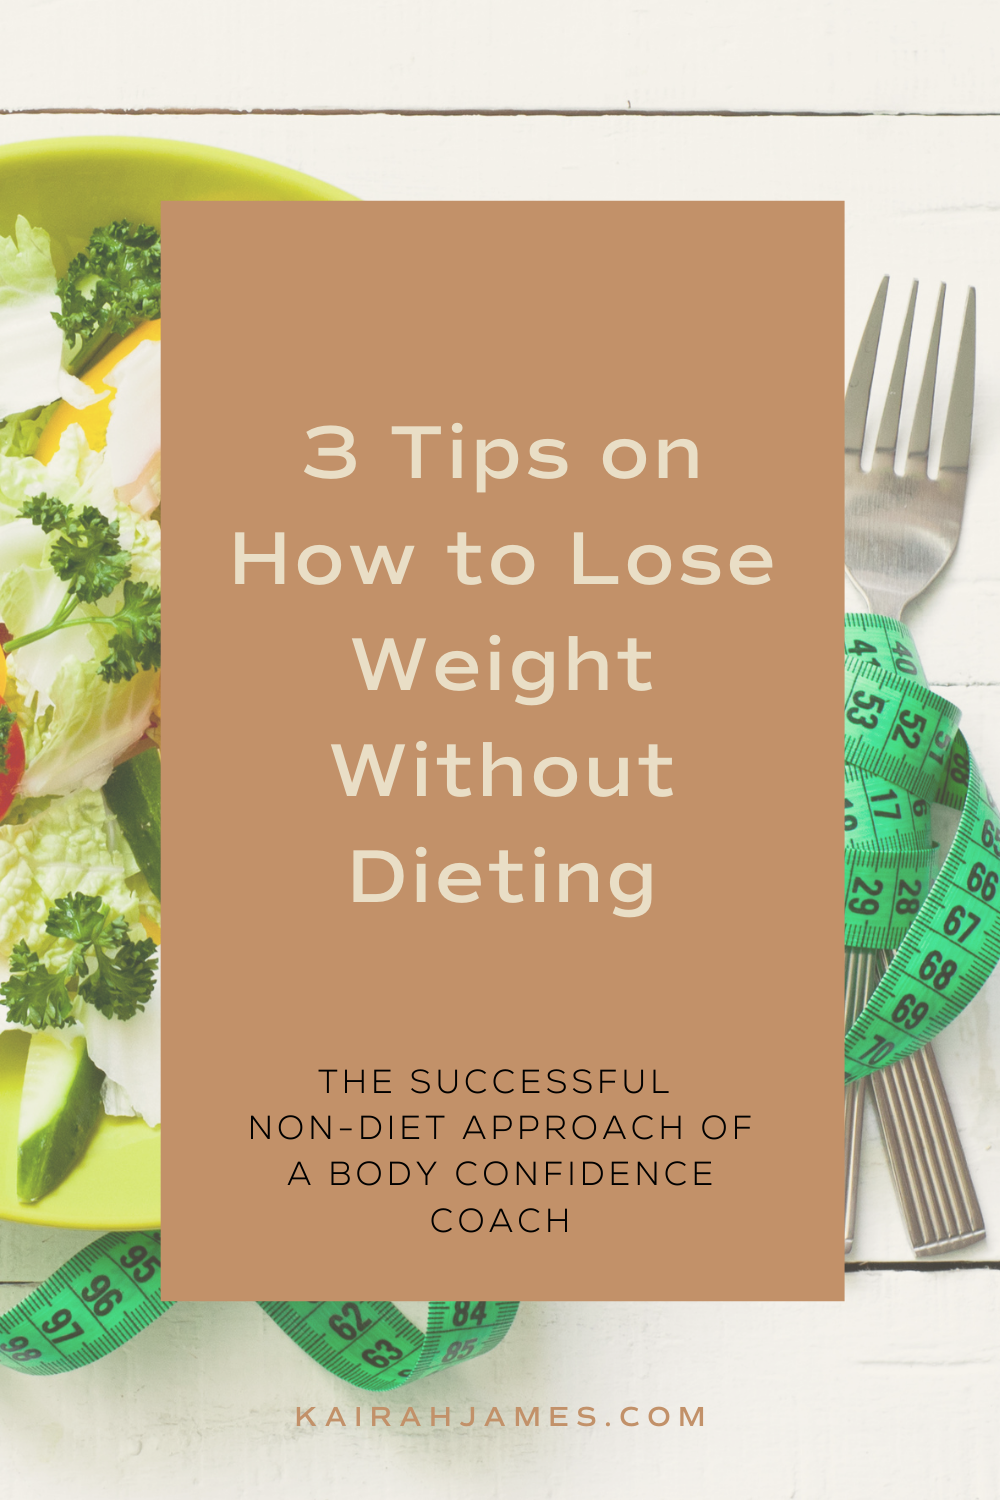 It's Time To Ditch The Diets_ 3 Tips On How To Lose Weight Without Dieting